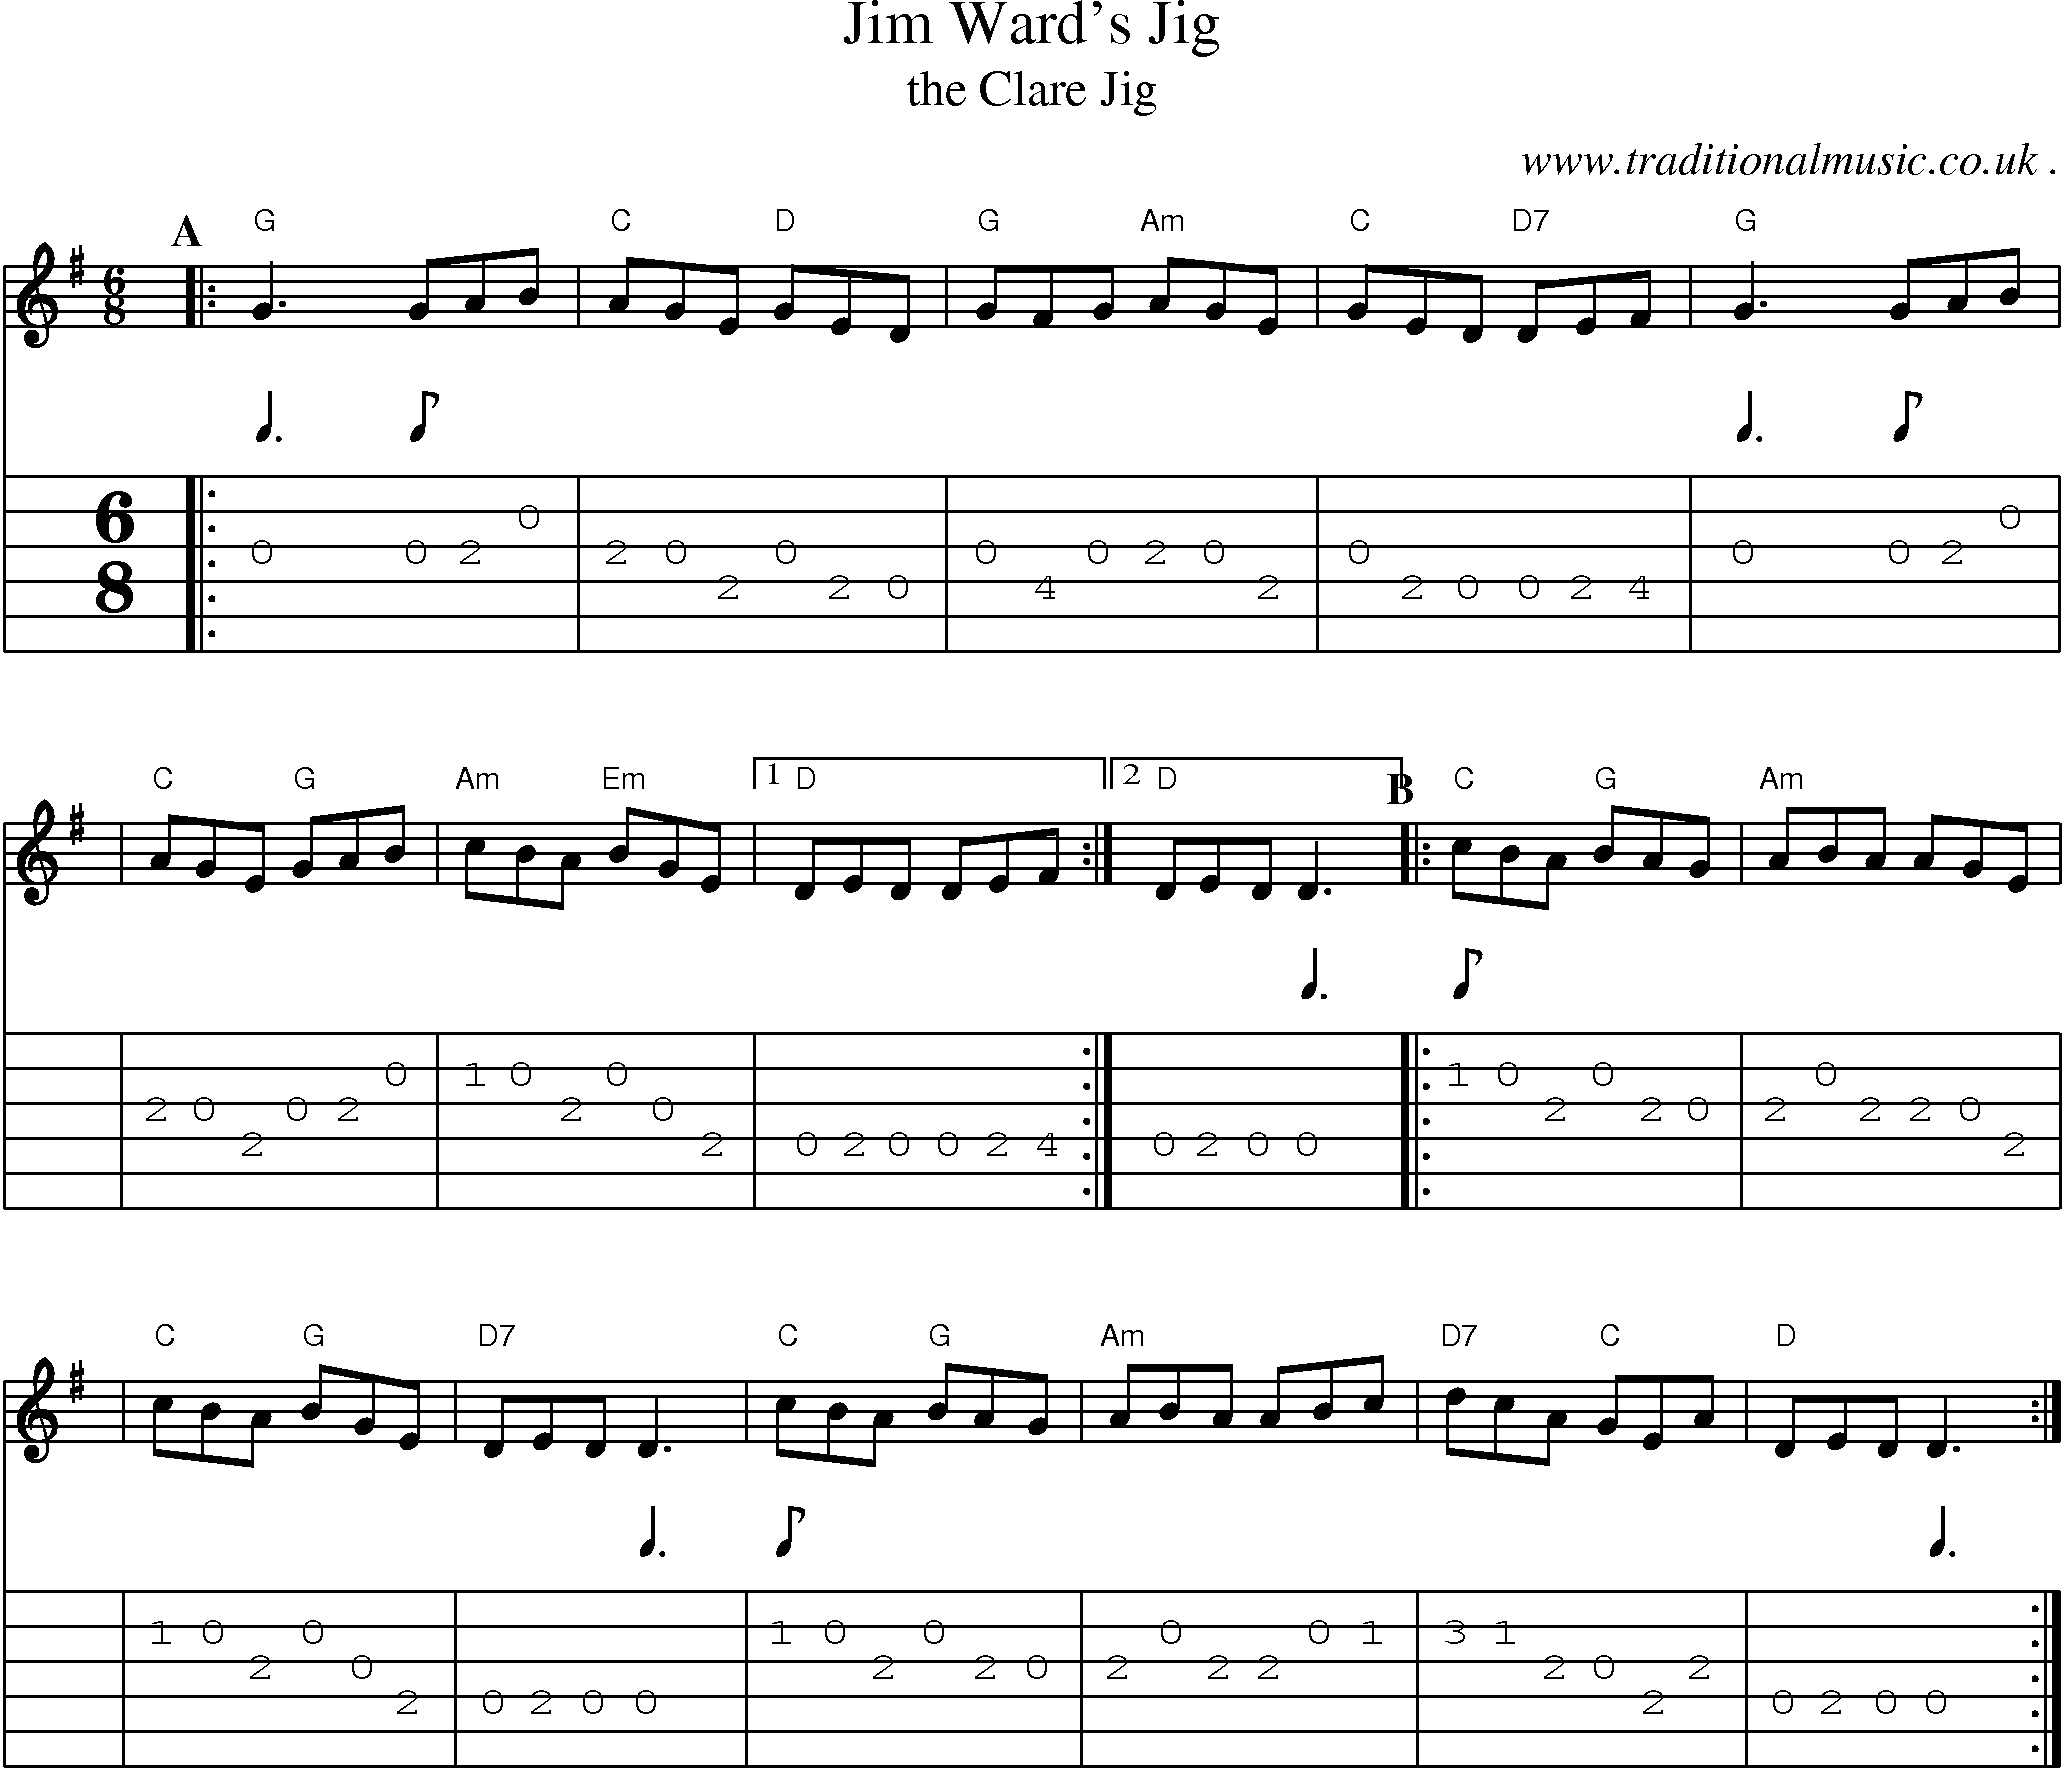 Sheet-music  score, Chords and Guitar Tabs for Jim Wards Jig